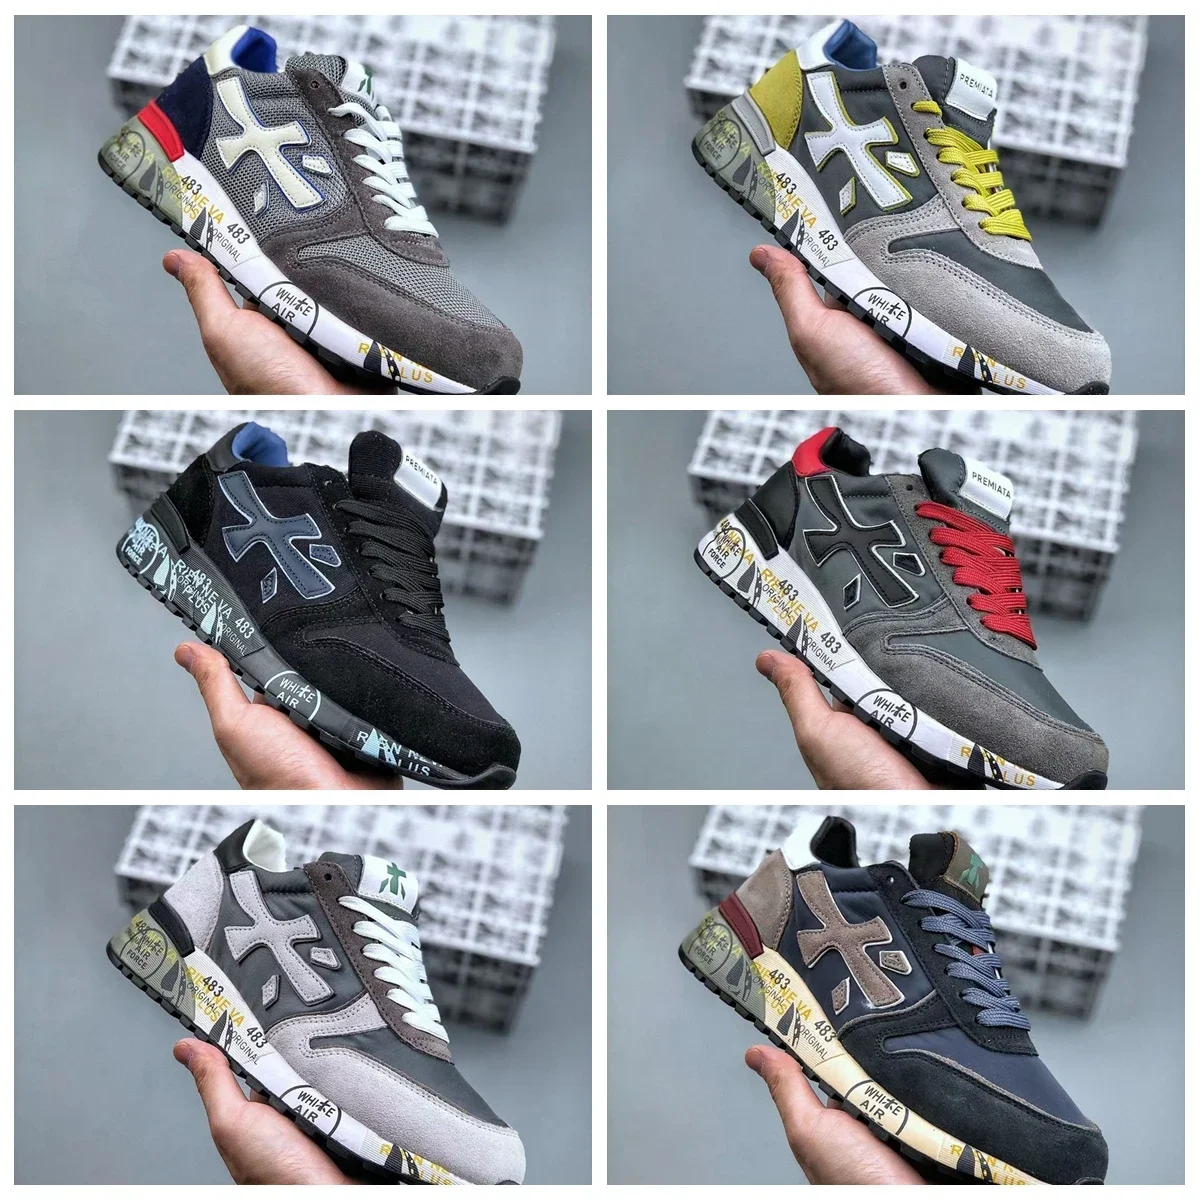 

Men's PREMIATA Shoes Fashion Lightning Skateboard Shoes Breathable Casual Shoes Student Couple Outdoor Sneakers Eur40-45